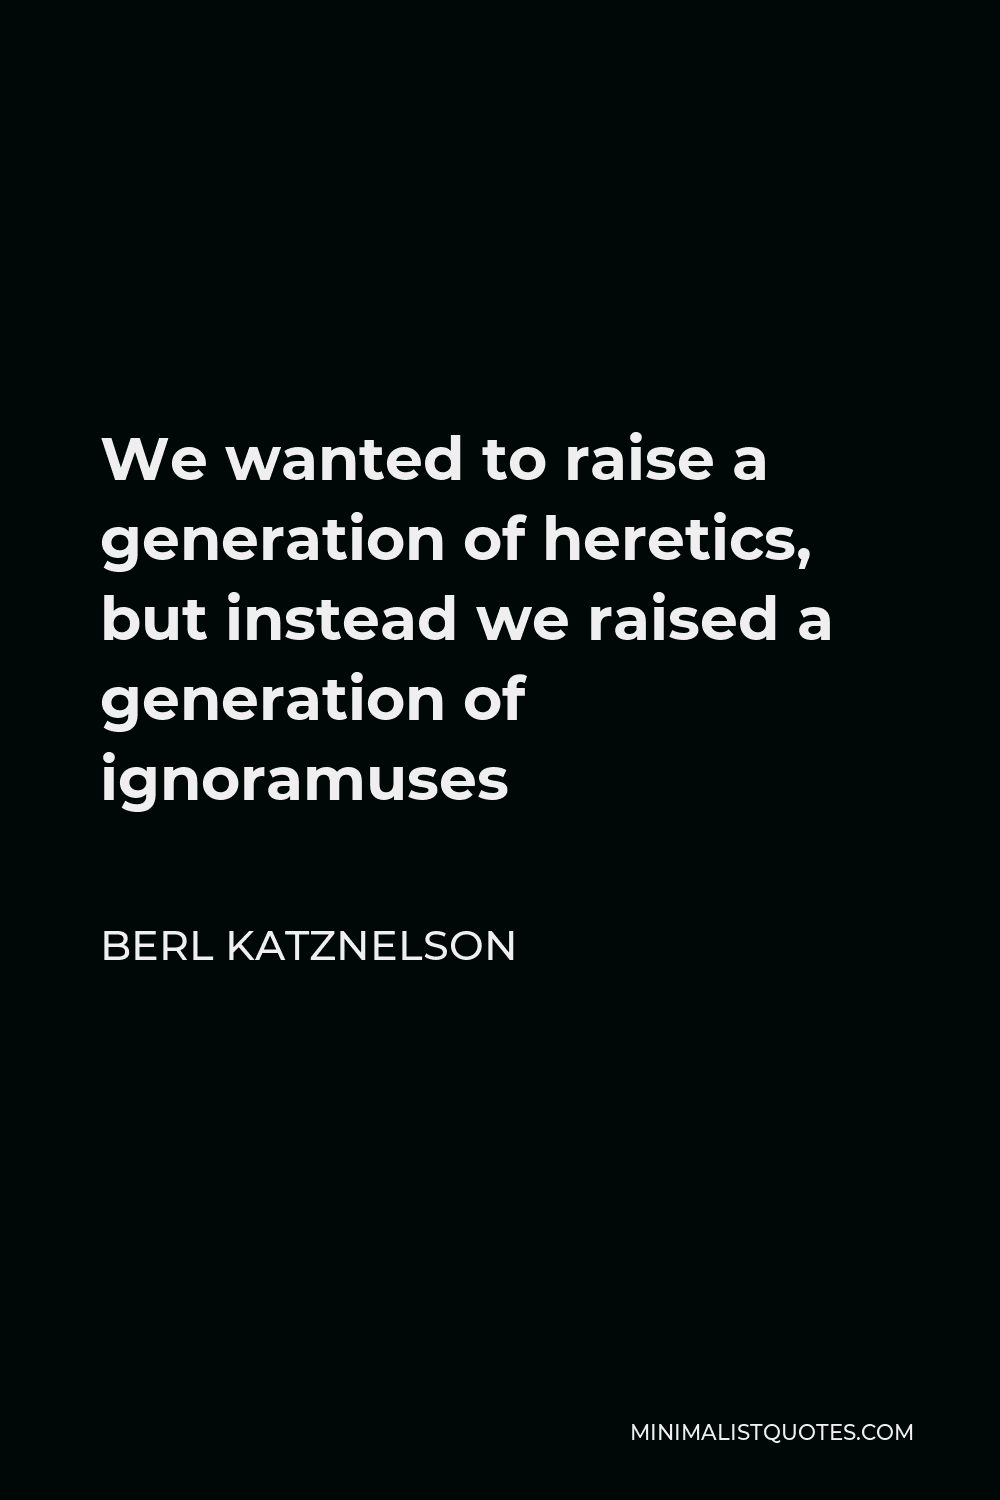 Berl Katznelson Quote - We wanted to raise a generation of heretics, but instead we raised a generation of ignoramuses